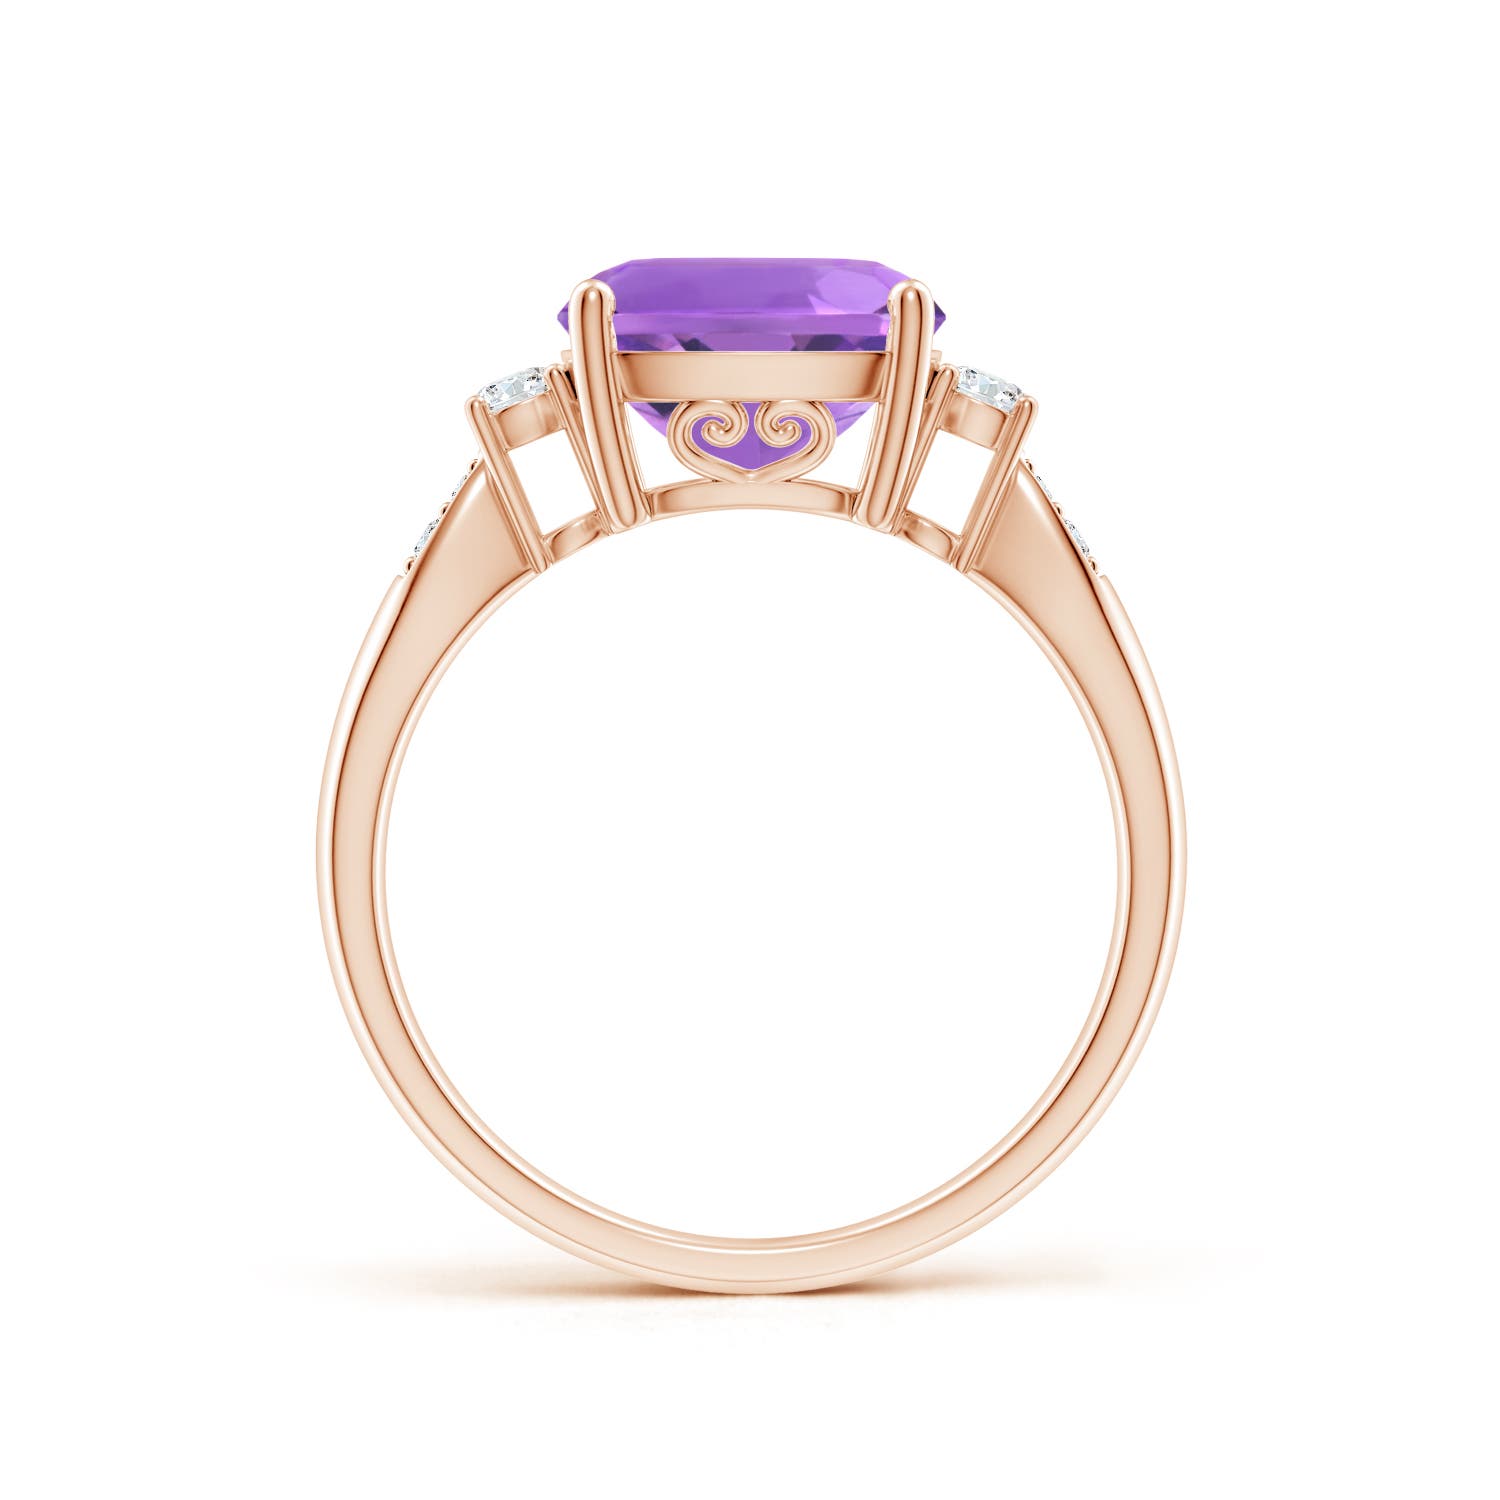 AA - Amethyst / 3.27 CT / 14 KT Rose Gold